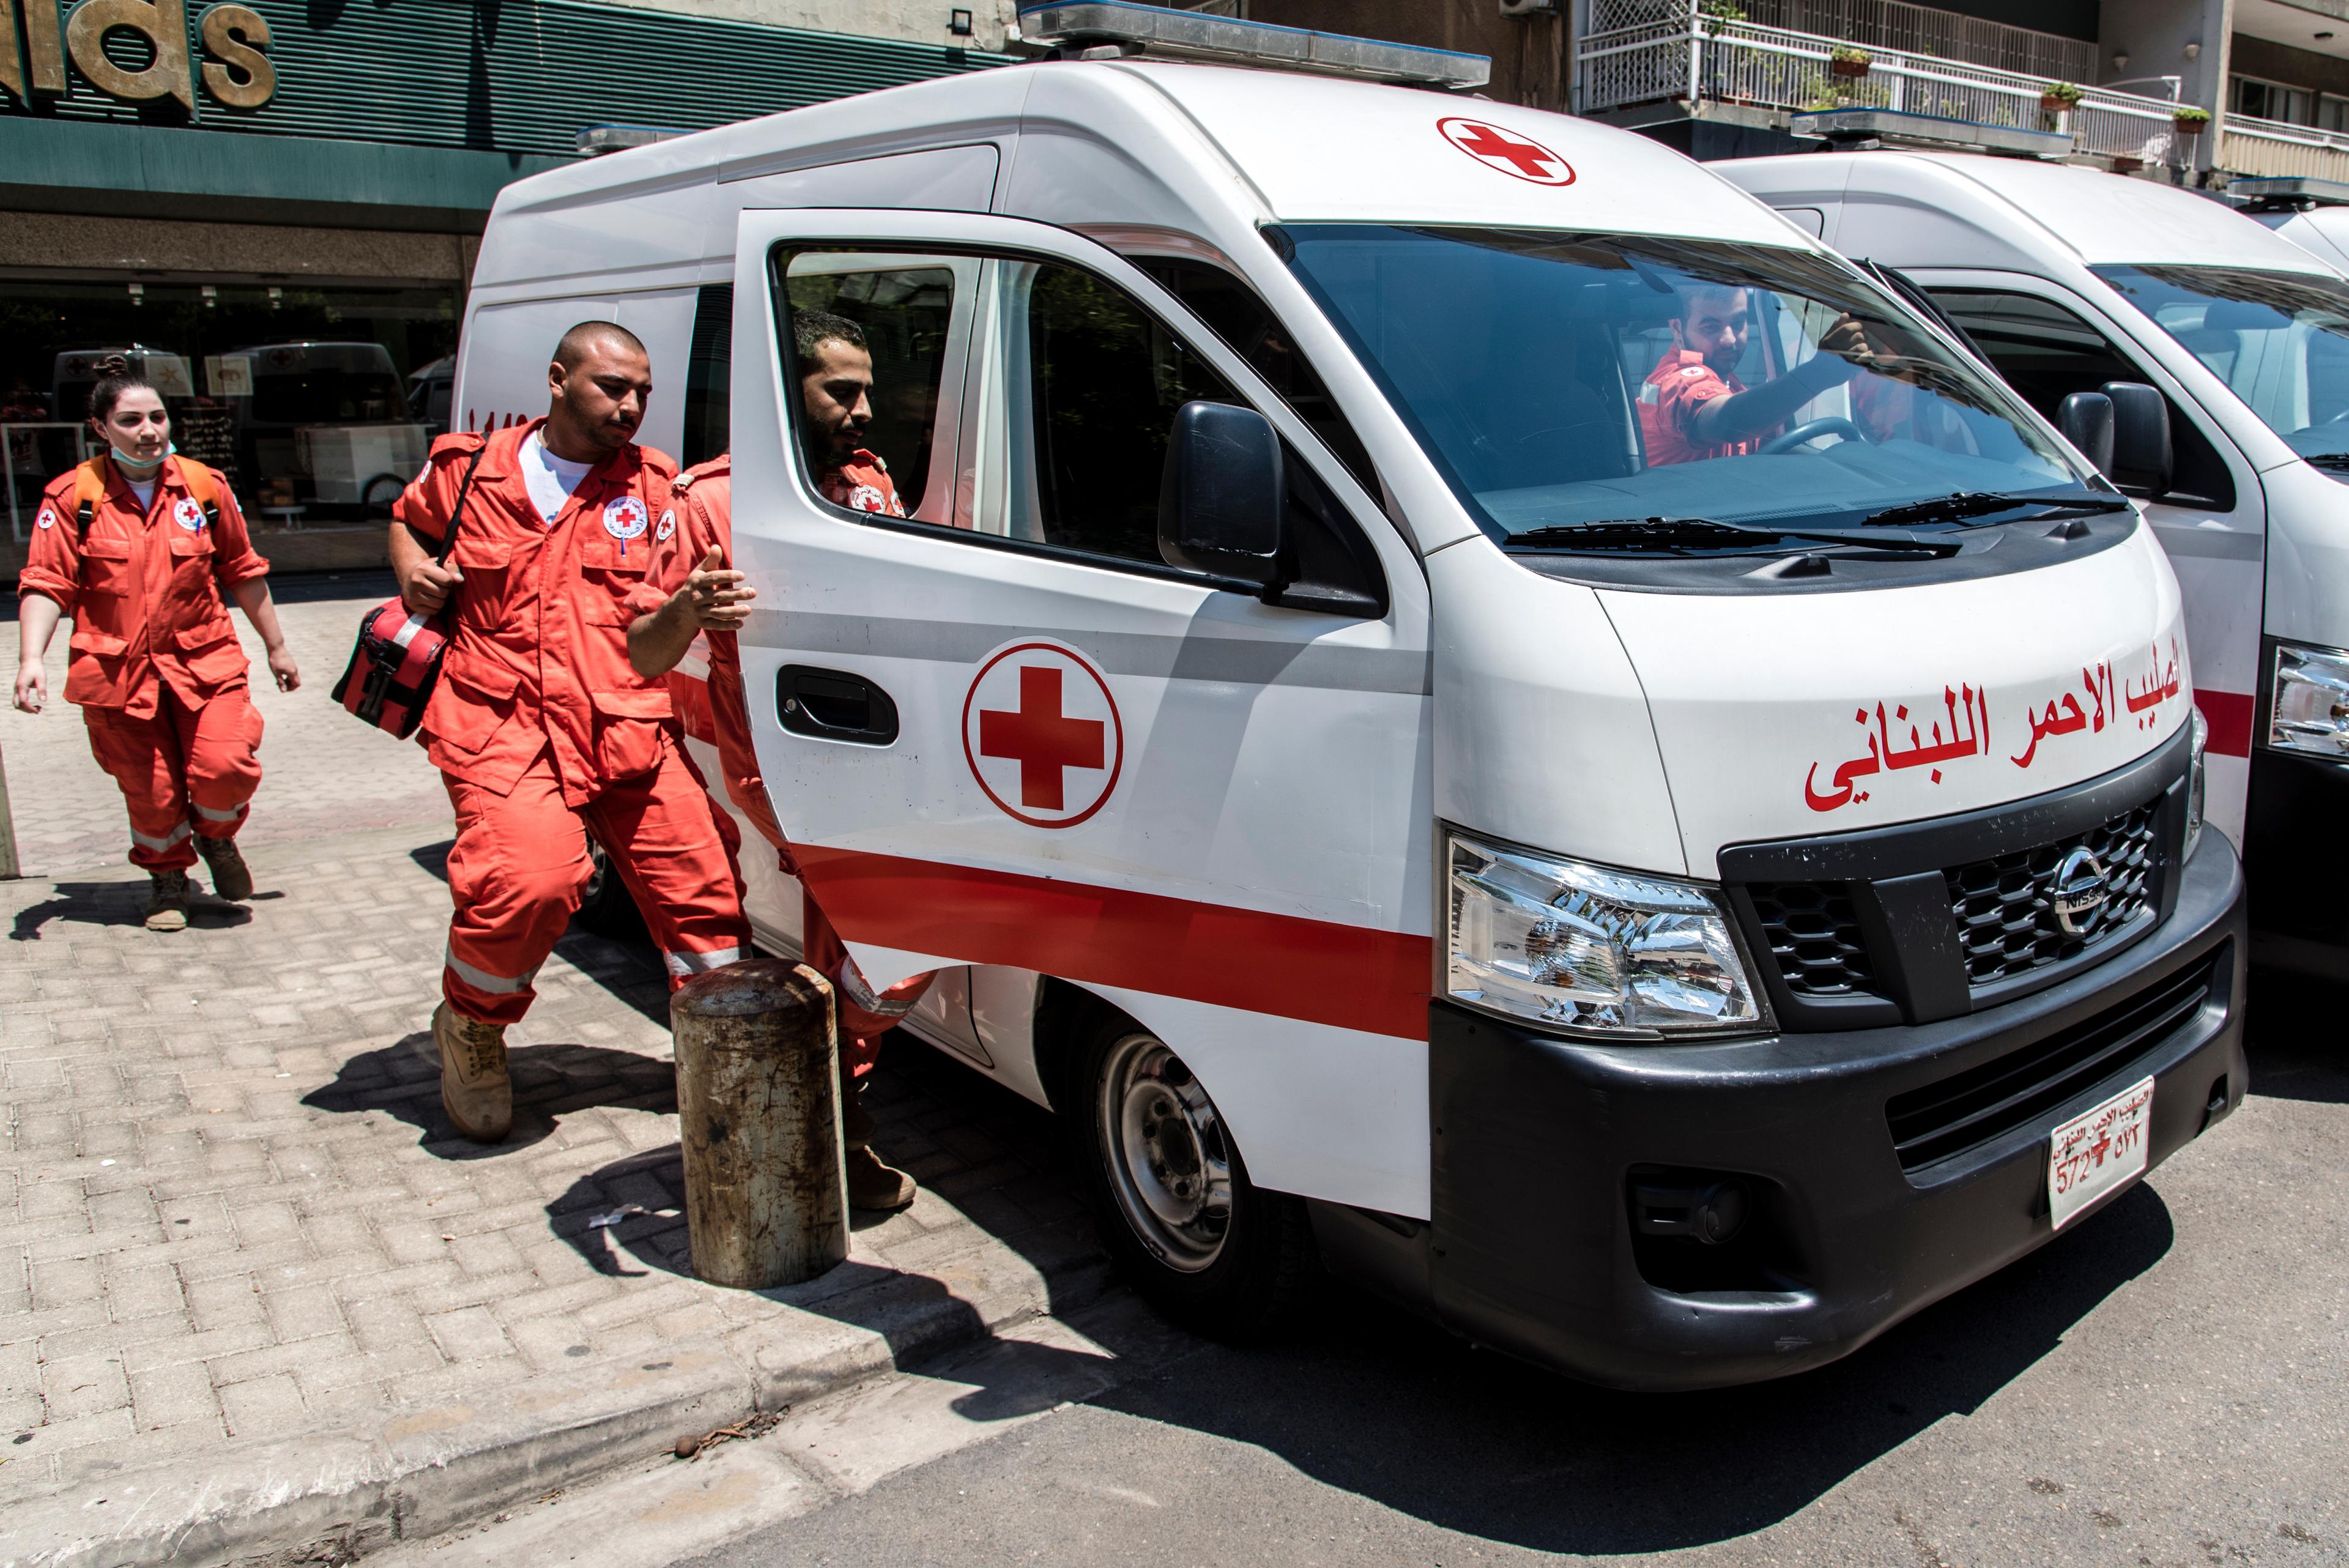 Three men and a woman from the Lebanese Red Cross ambulance service board their rescue vehicle in Tripoli.